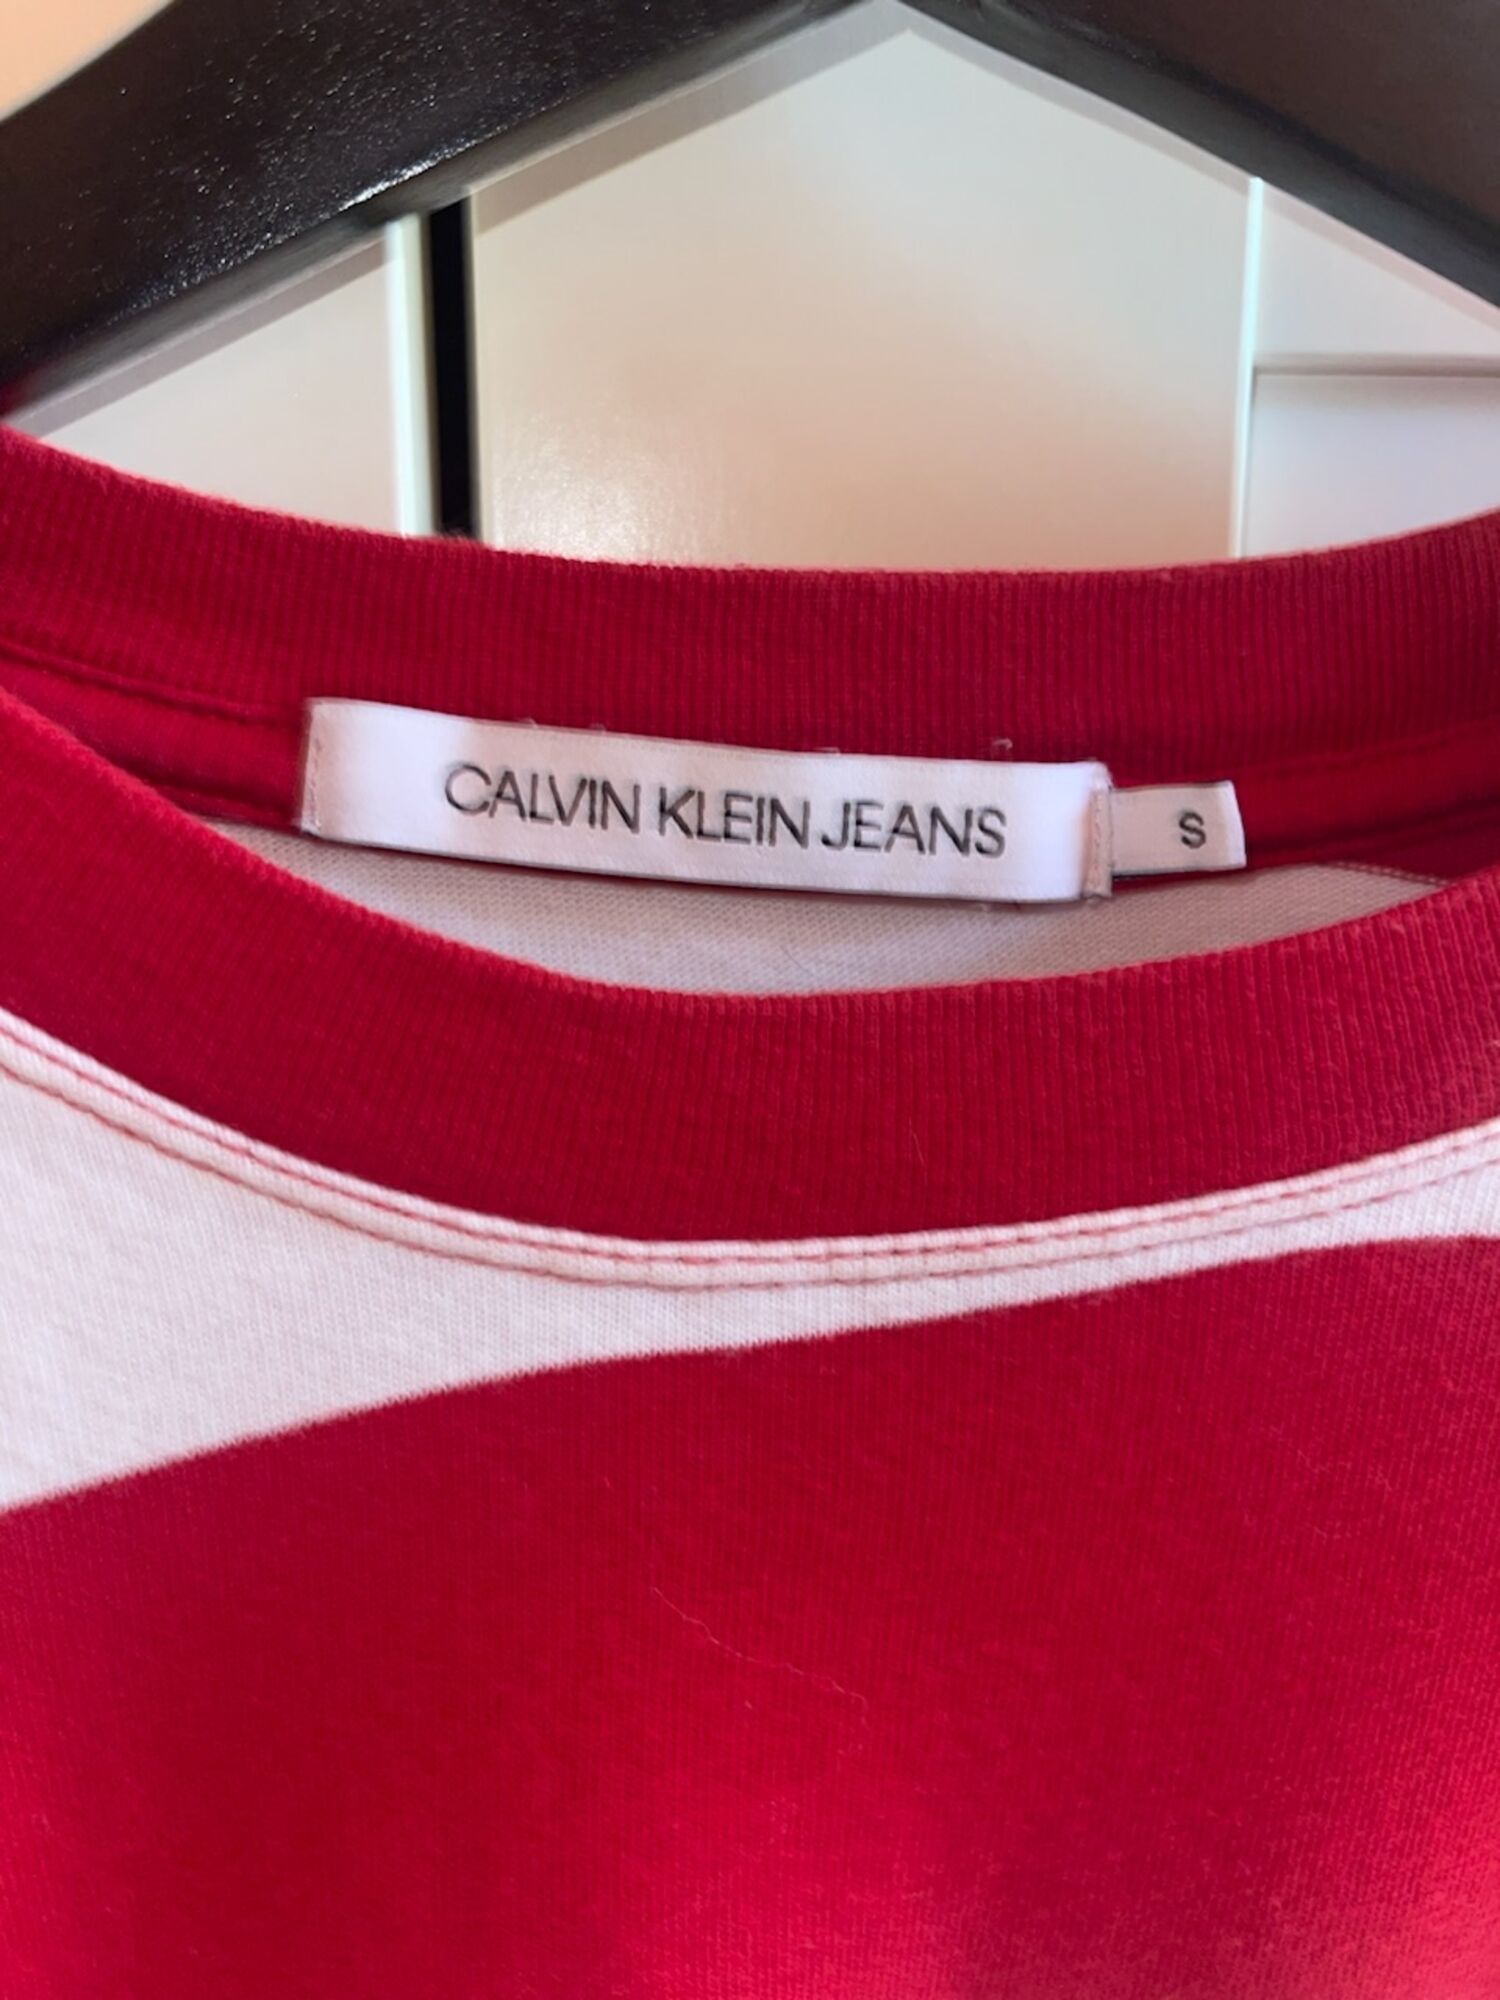 Cotton t-shirt Calvin Klein - S, buy pre-owned at 30 EUR